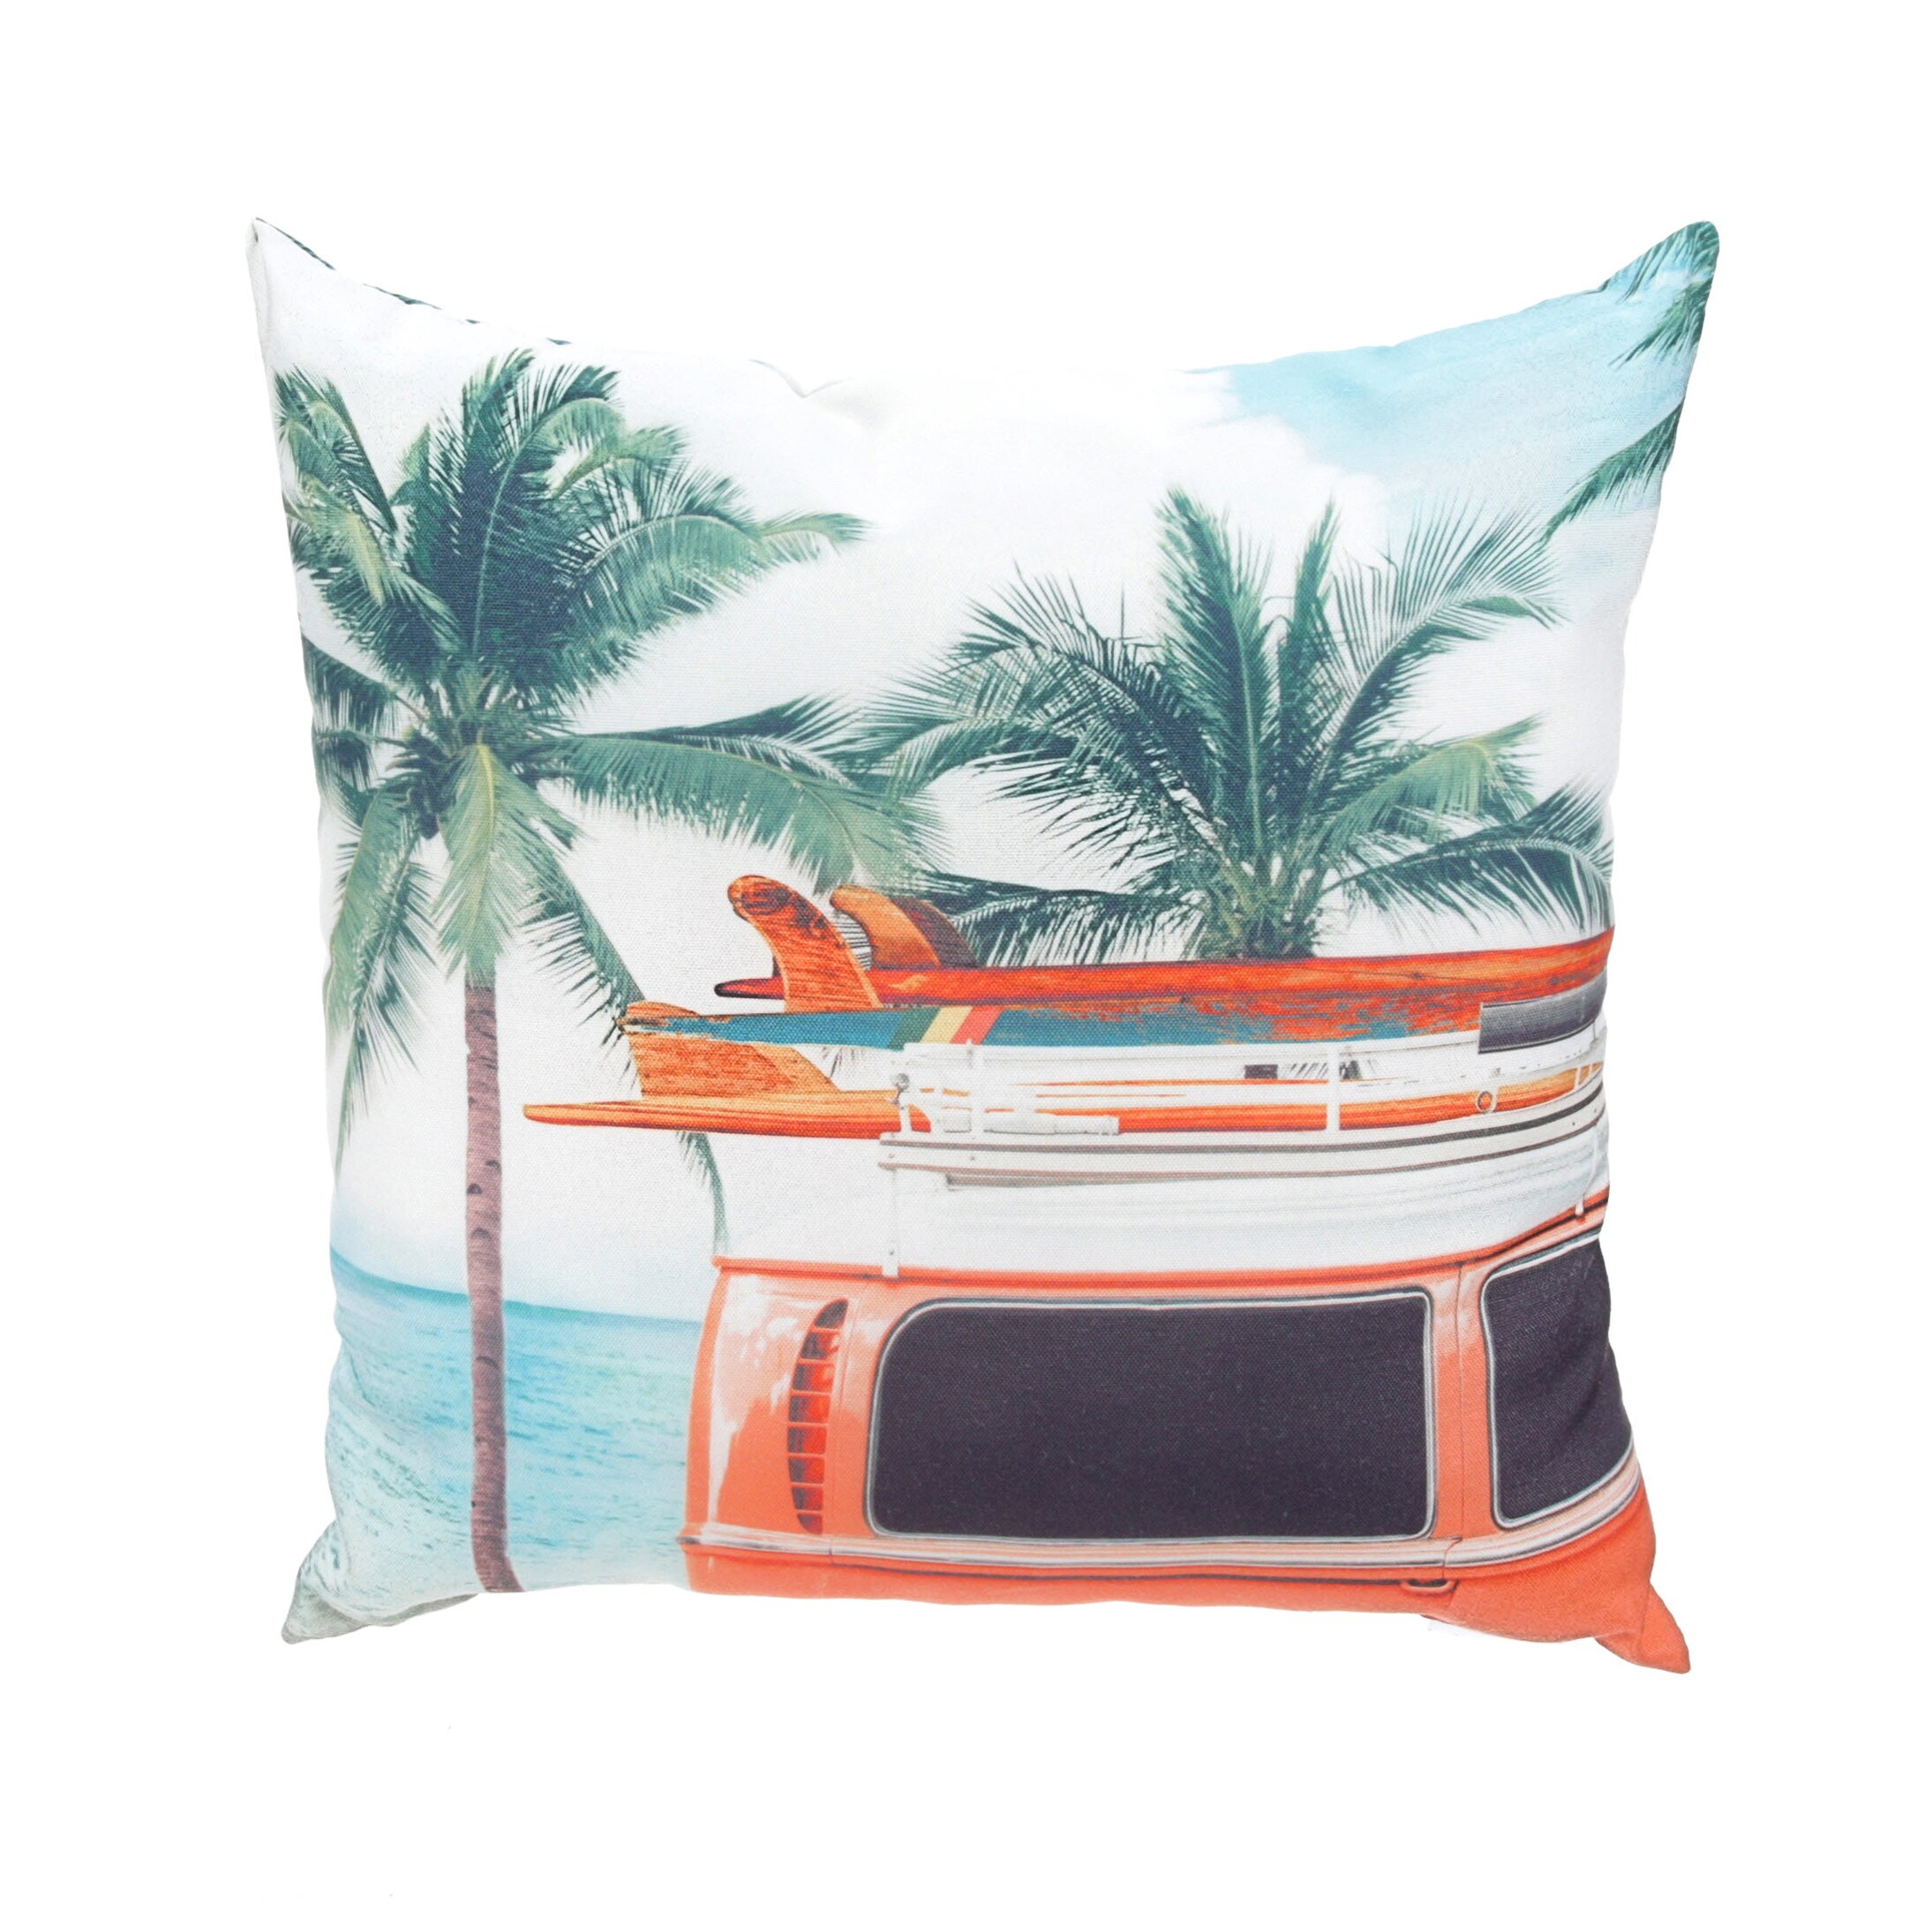 Garden Treasures Graphic Print Surf Van Square Throw Pillow at Lowes.com